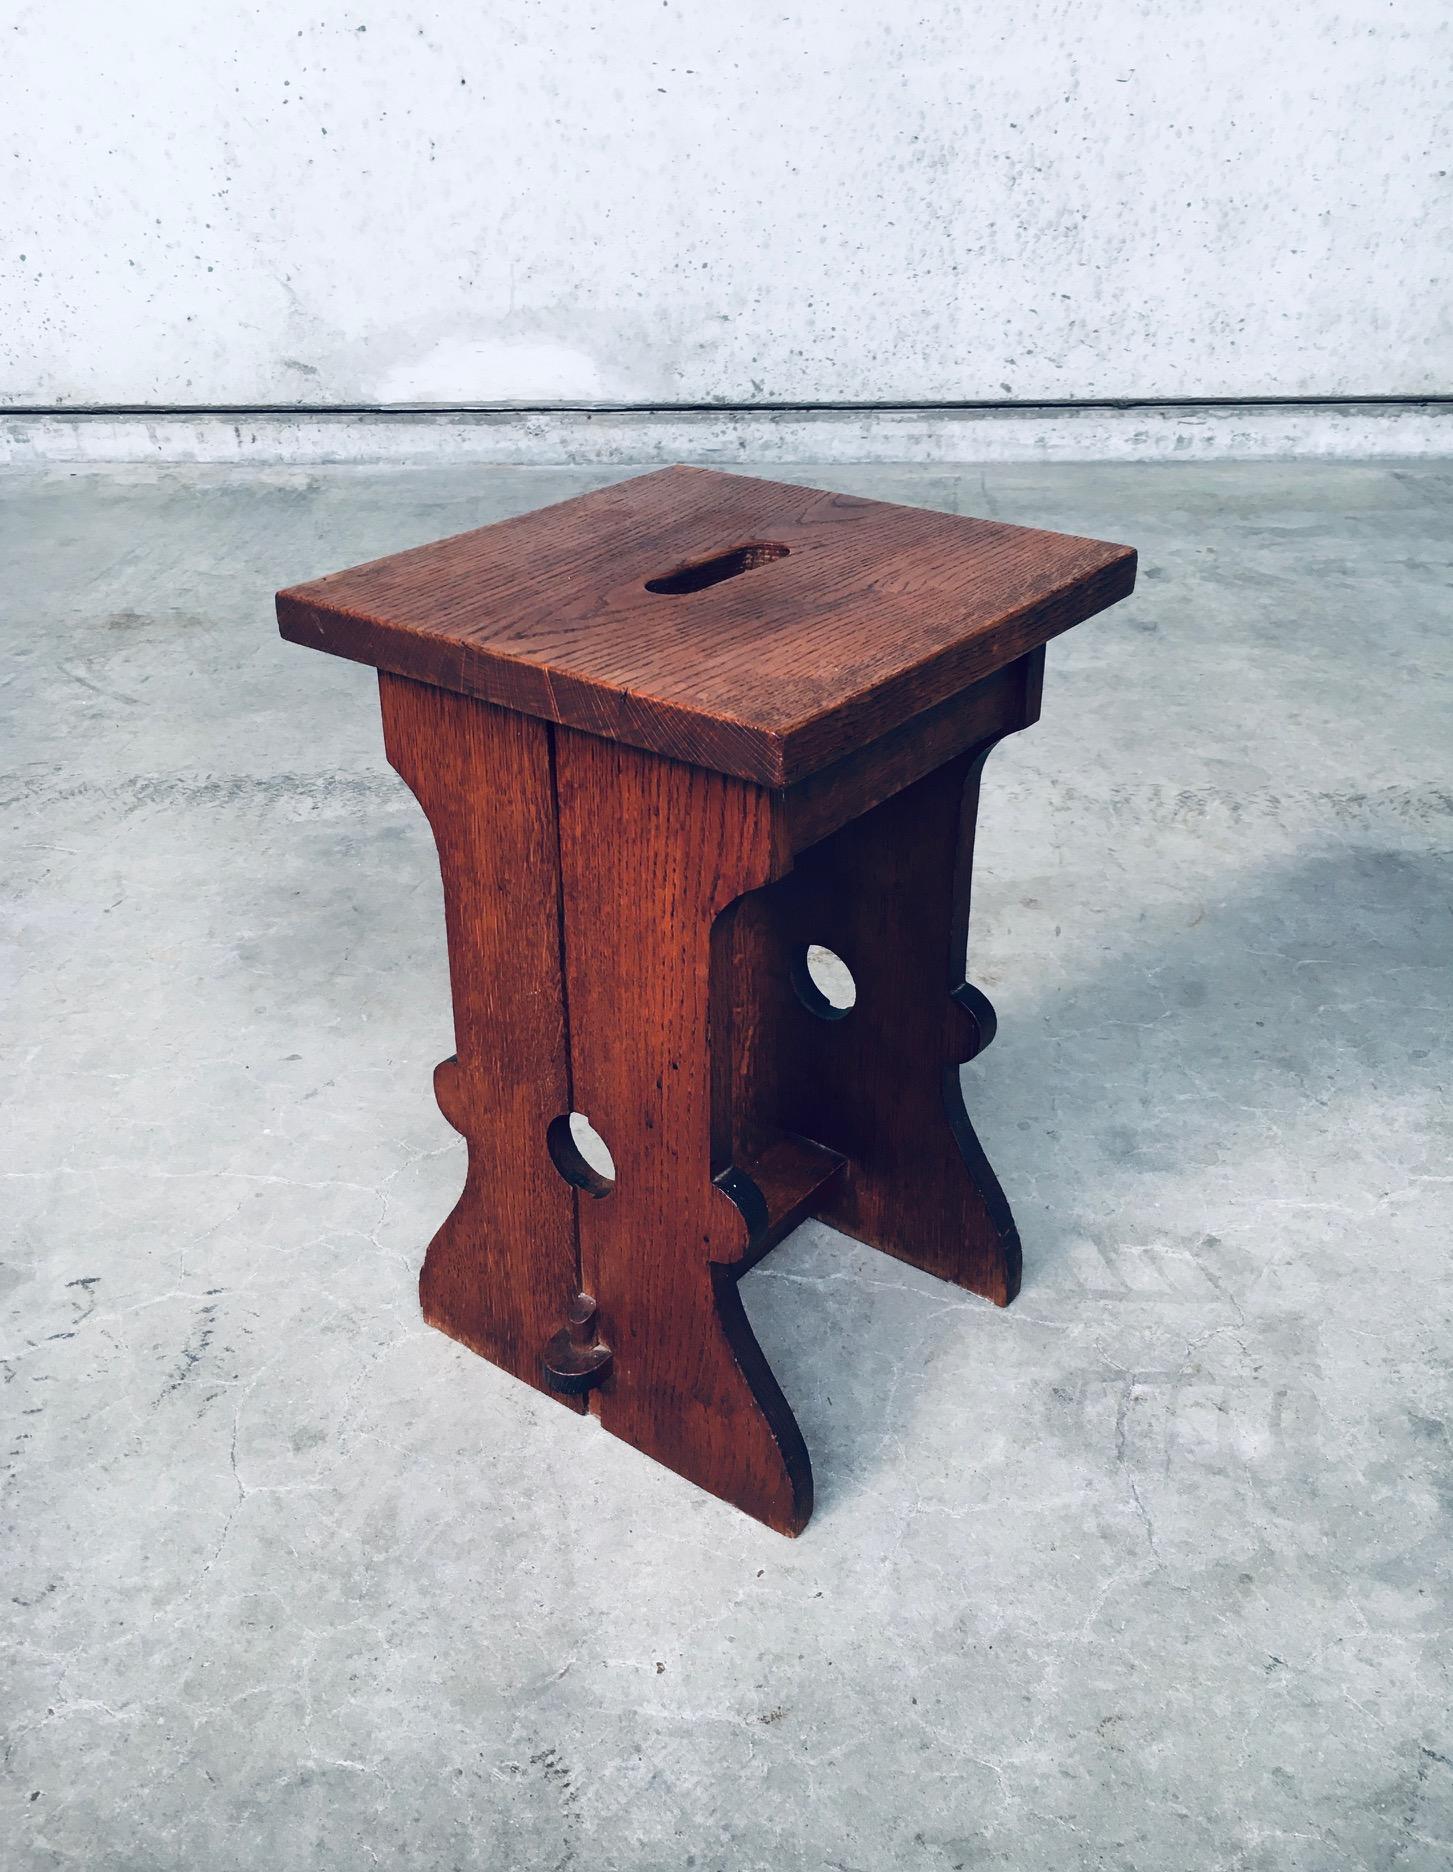 Early 20th Century Amsterdamse School Design Arts & Crafts Oak Handle Stool. Made in the Netherlands, 1920's period. Solid oak constructed stool or side table. Designed with nice eye for details. This comes in very good, original condition. Measures